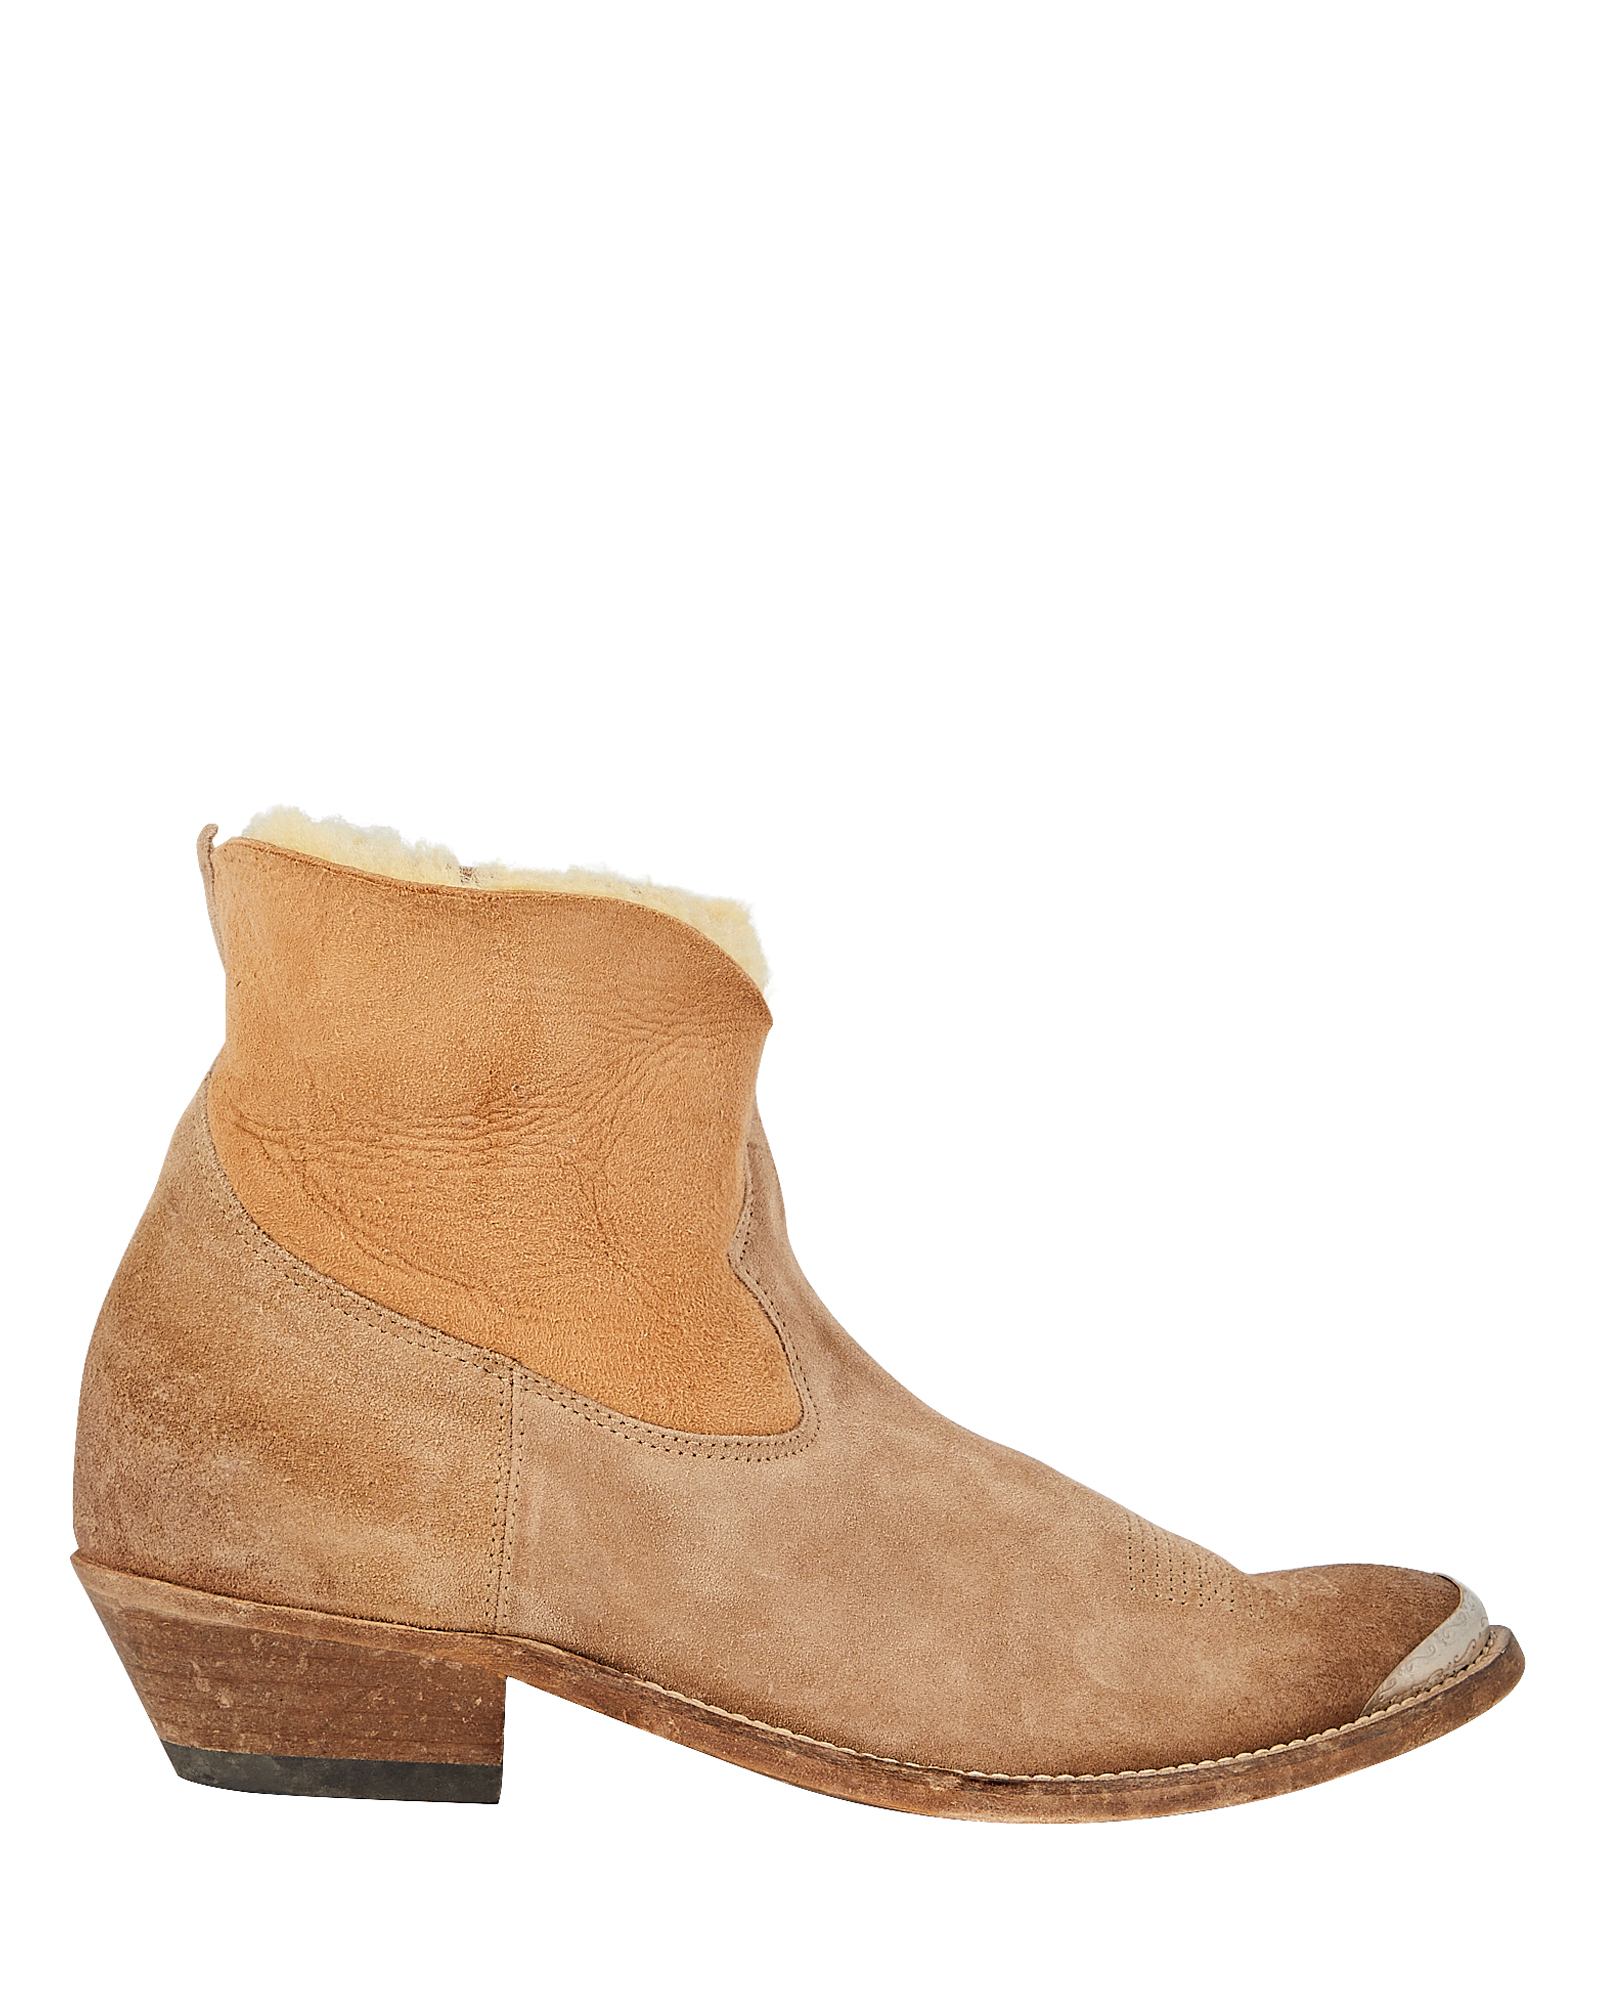 GOLDEN GOOSE YOUNG SHEARLING-LINED SUEDE ANKLE BOOTS